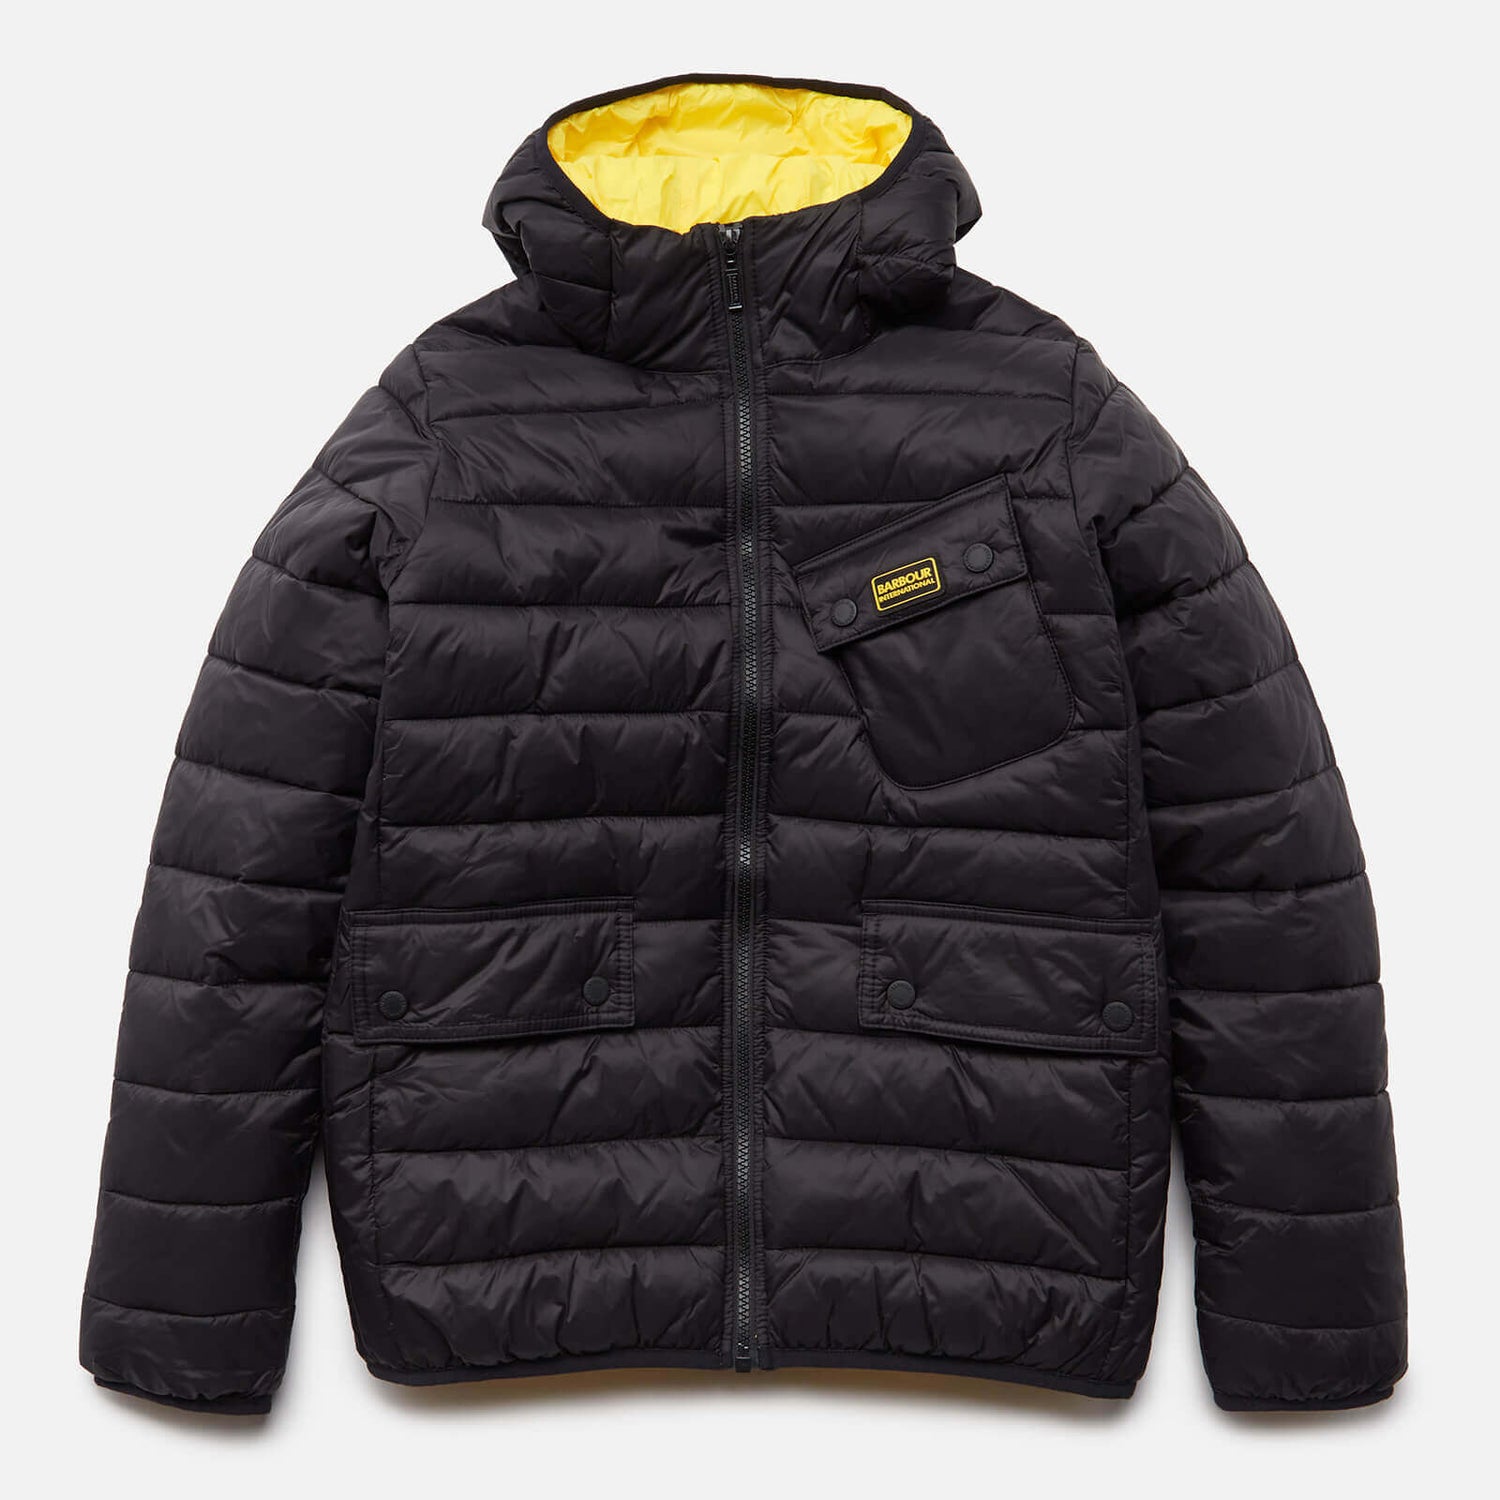 Barbour International Boys' Ouston Hooded Quilt - Black/Yellow